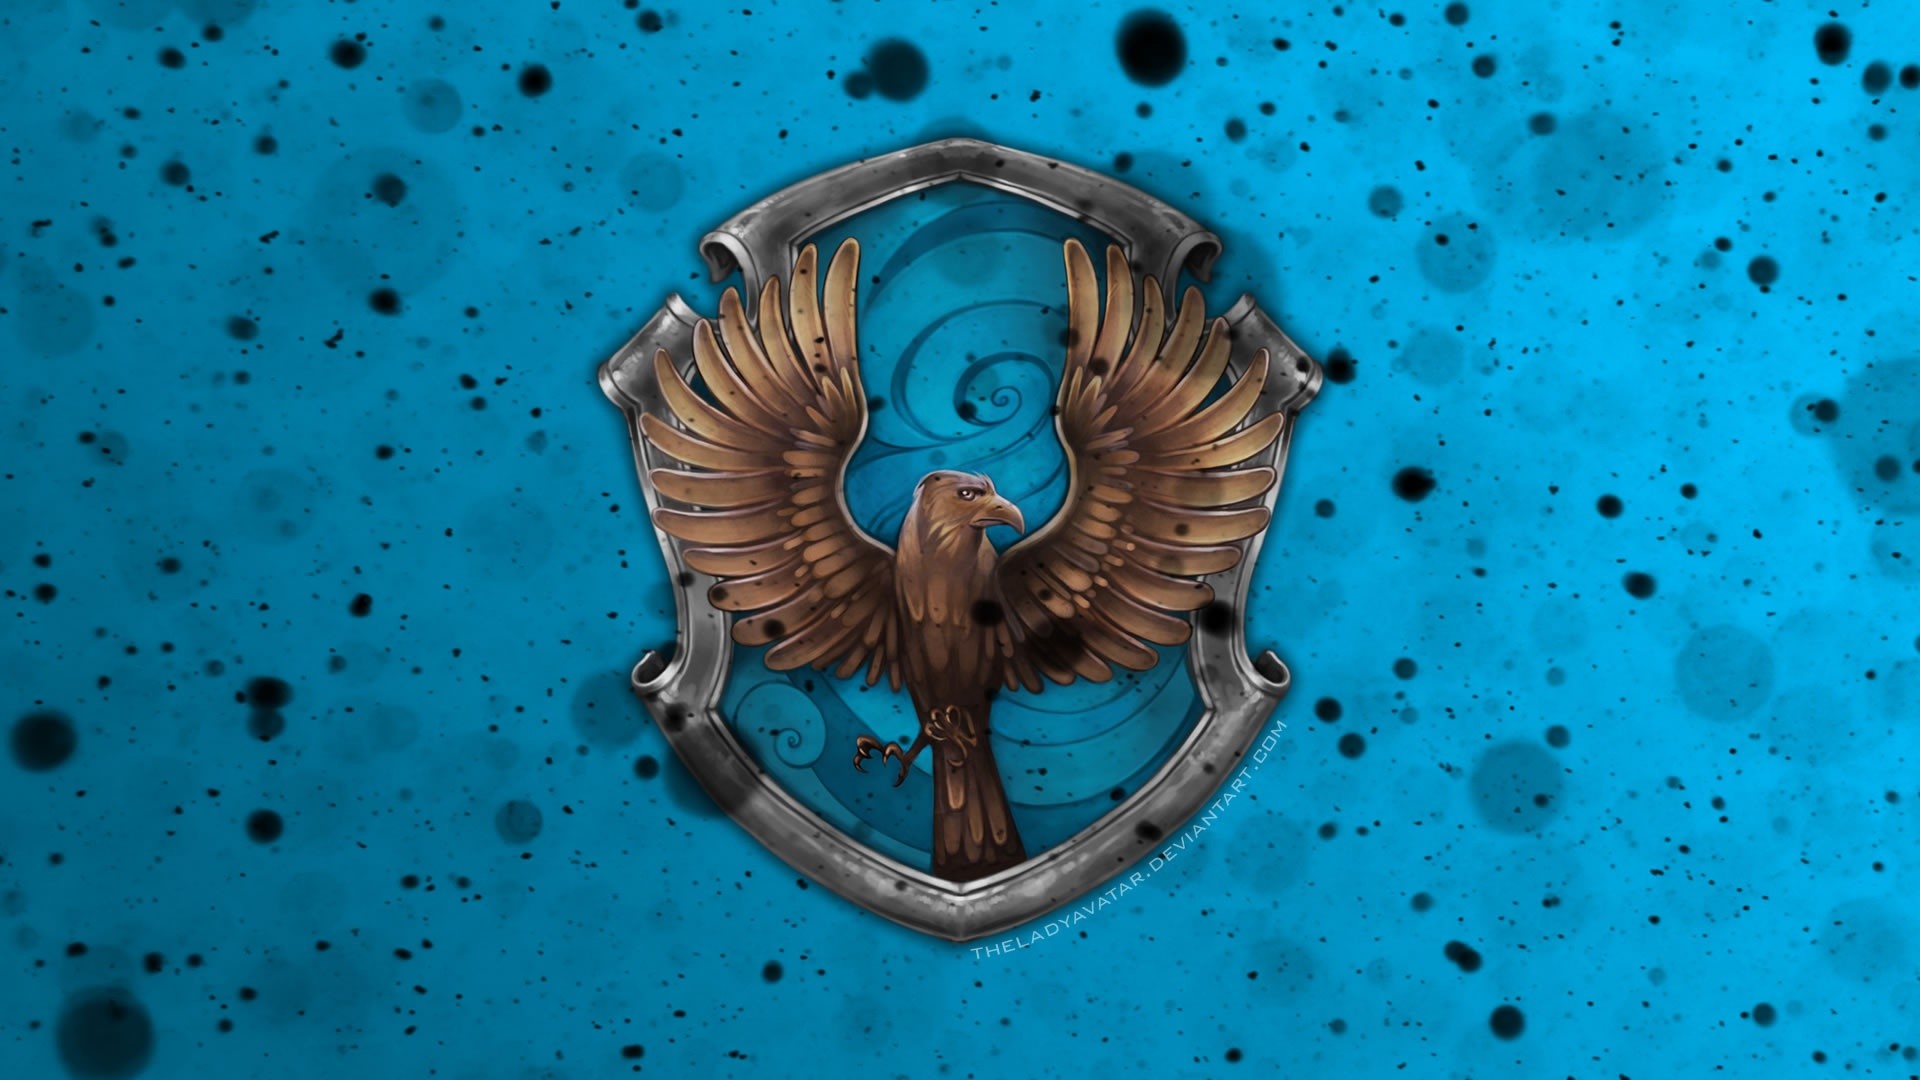 Free download Harry Potter Iphone Wallpaper Ravenclaw Ravenclaw logo  640x960 for your Desktop Mobile  Tablet  Explore 49 Ravenclaw iPhone  Wallpaper  Ravenclaw Wallpaper Gundam iPhone Wallpaper Watchmen Wallpaper  iPhone